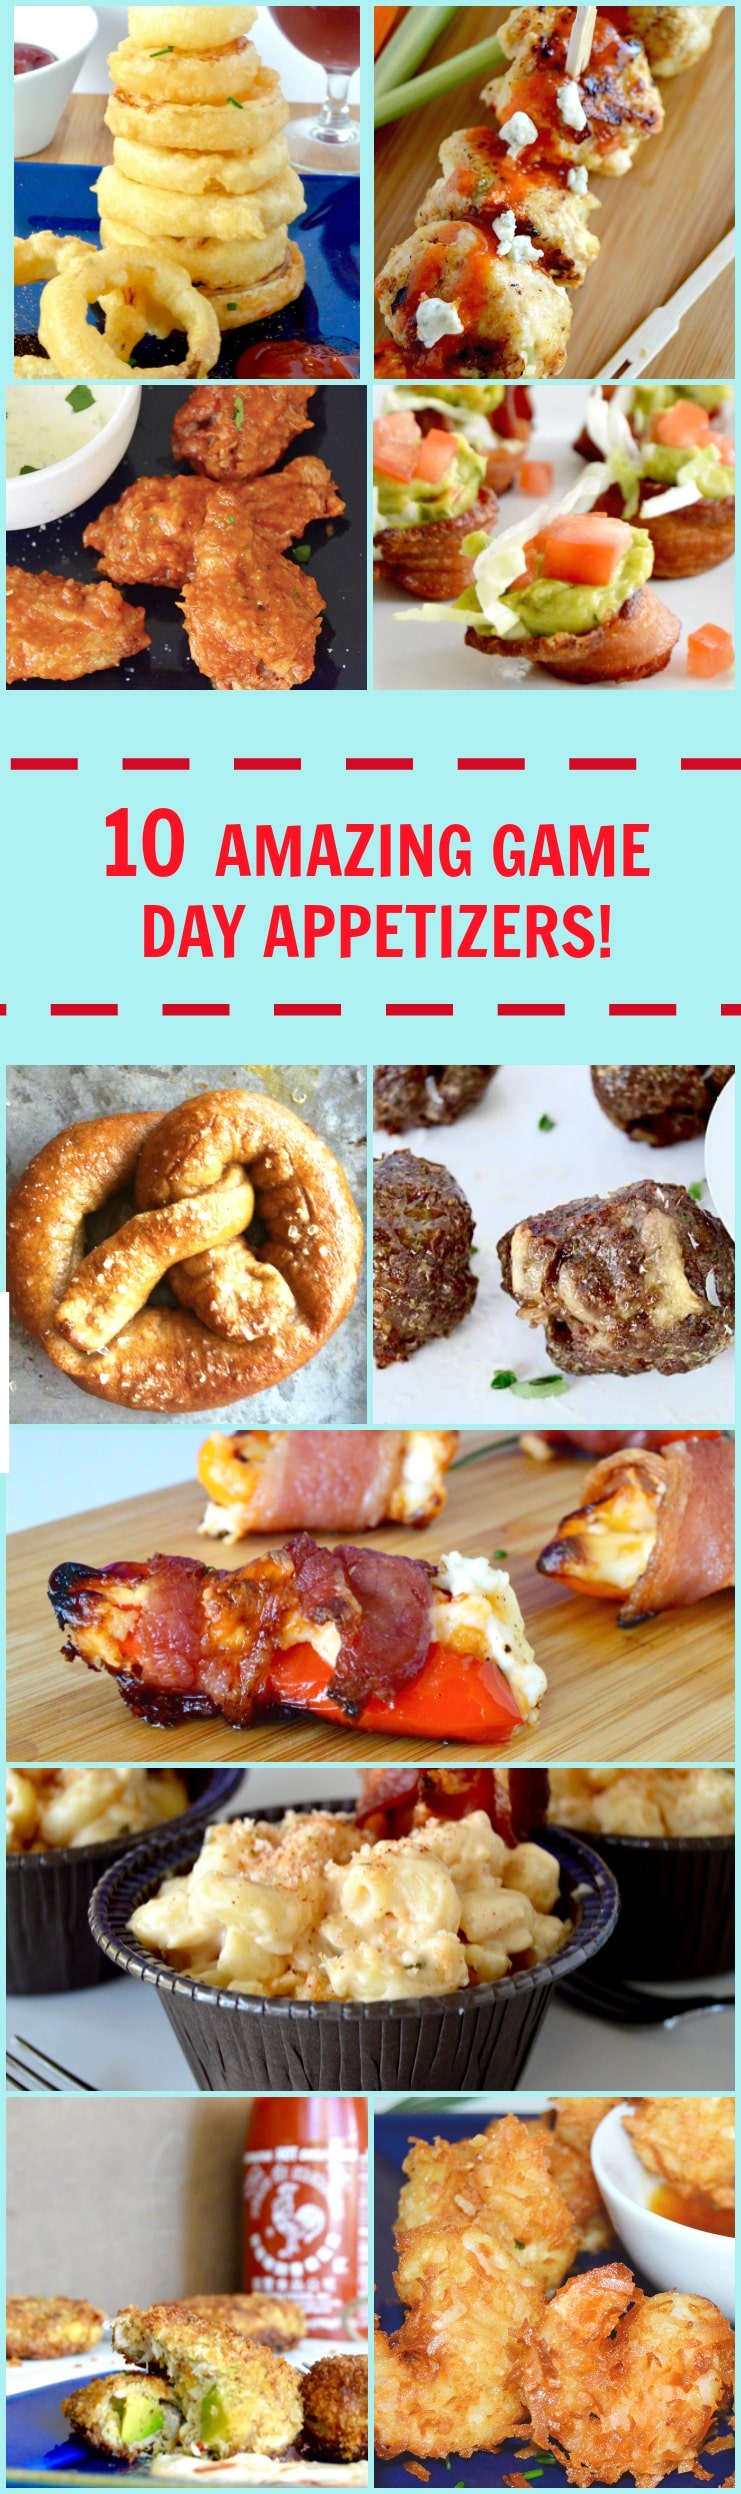 10 amazing Game day Appetizers that will be perfect for any Game day Party! chicken wings, avocado crabcake, buffalo meatballs, Mac n cheese, onion rings, pretzels, poppers, bacon 